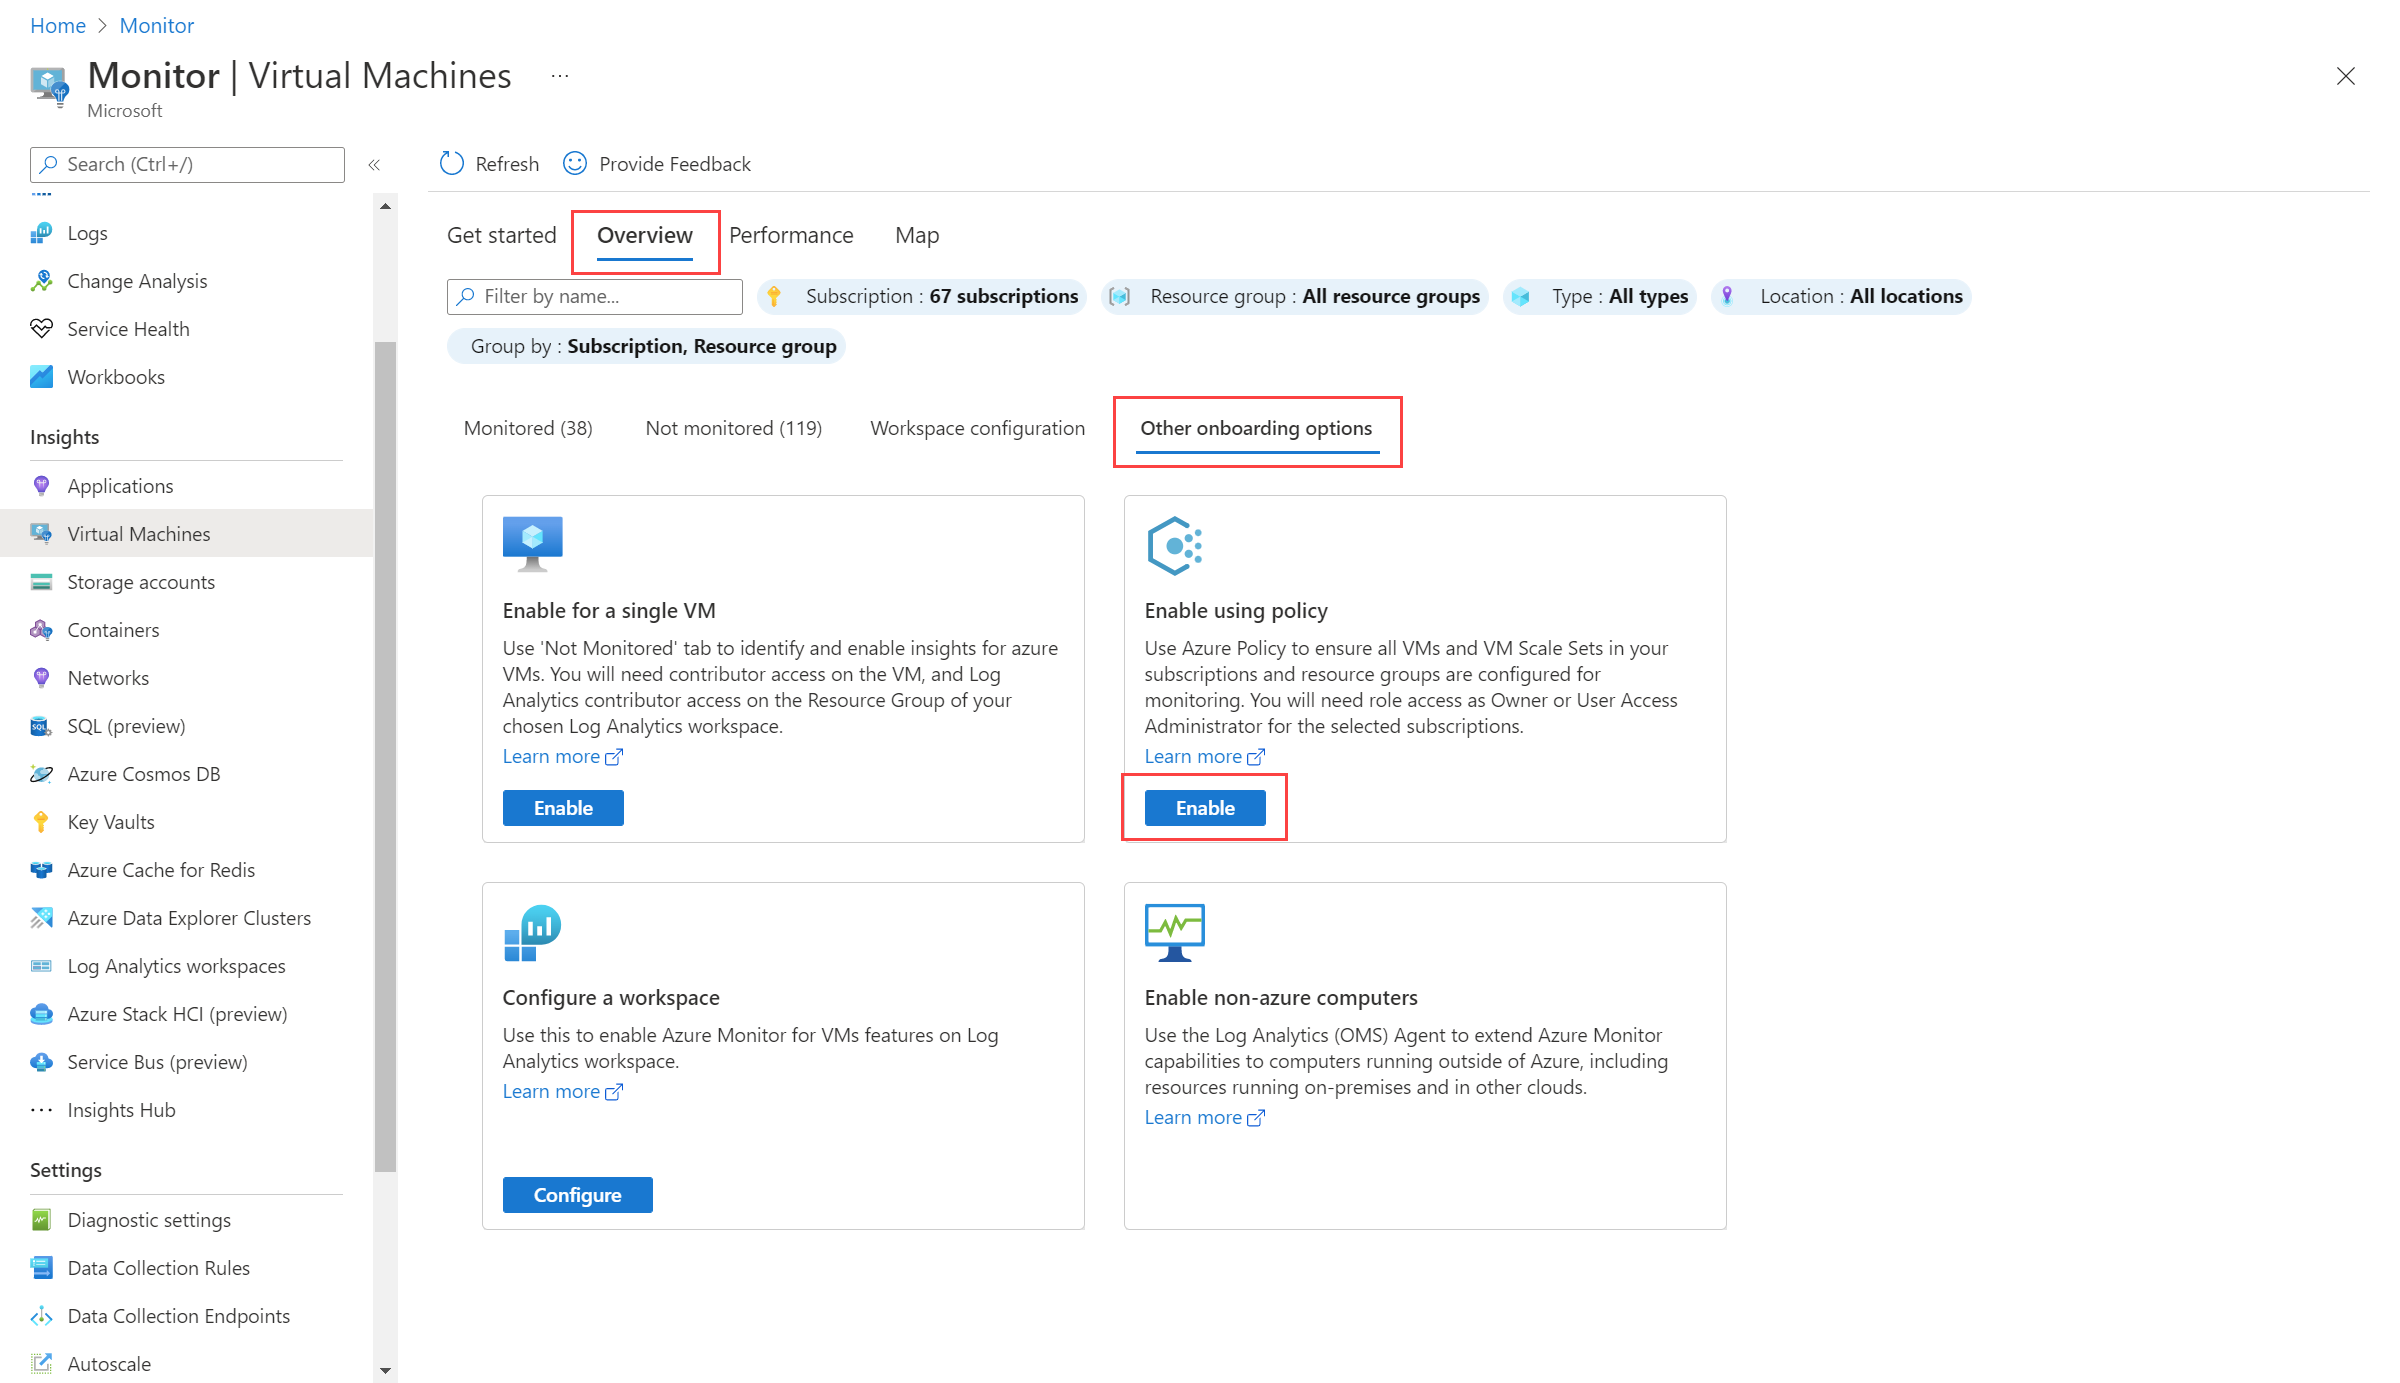 Screenshot that shows other onboarding options page of VM insights with the Enable using policy option.